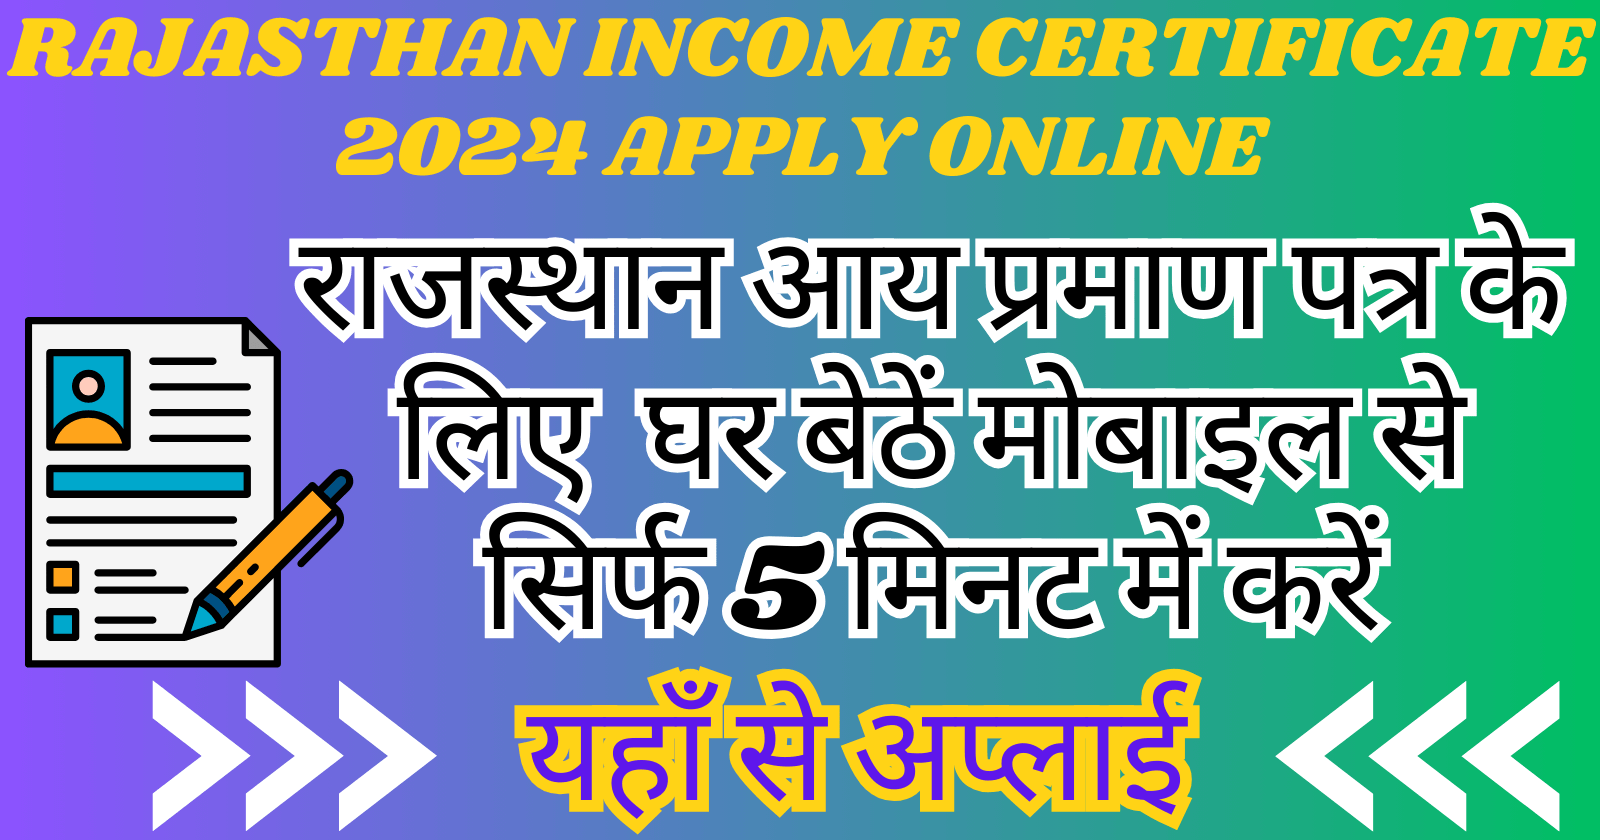 Rajasthan Income Certificate 2024 Apply Online